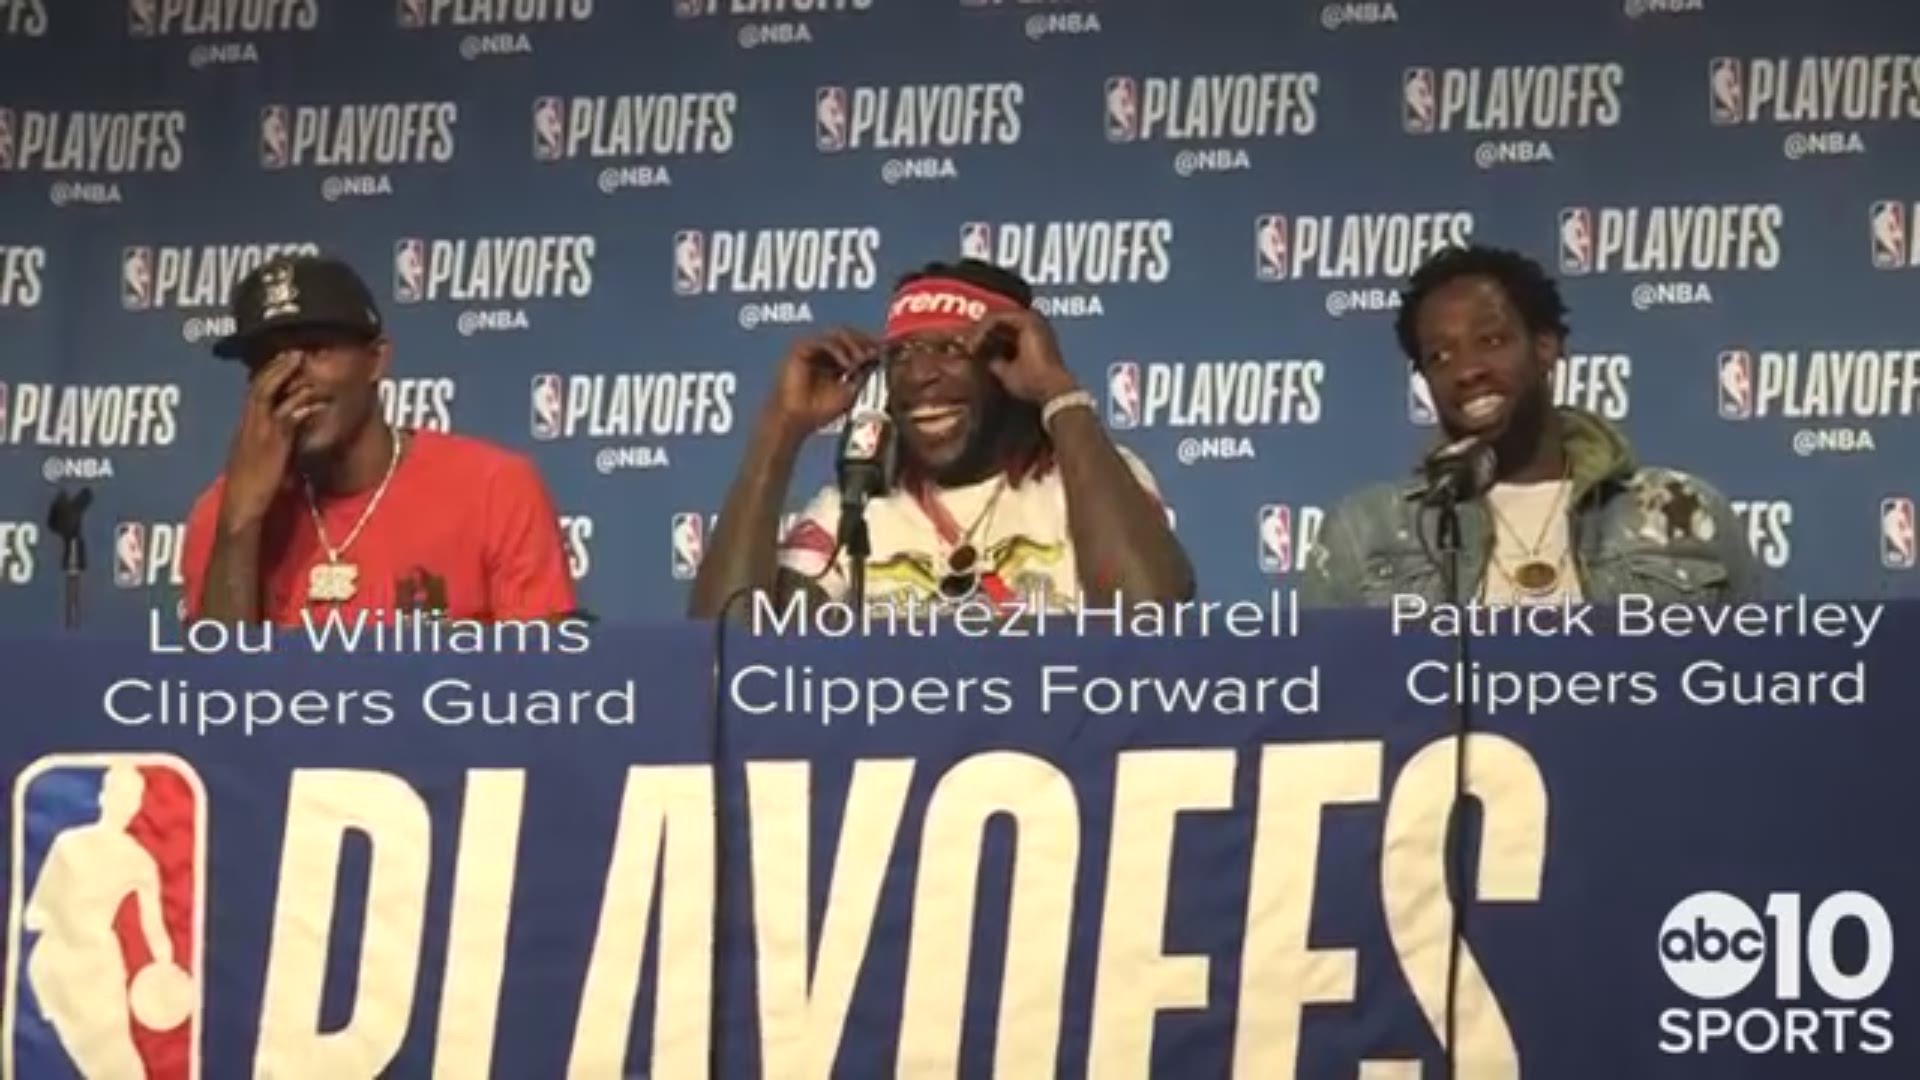 Clippers players Lou Williams, Montrezl Harrell and Patrick Beverly discuss Wednesday's Game 5 playoff victory over the Golden State Warriors to make the series 3-2 heading to Los Angeles for Friday's Game 6. Williams discusses his 33 point performance, his role coming off the bench and the confidence of the team heading back to L.A.